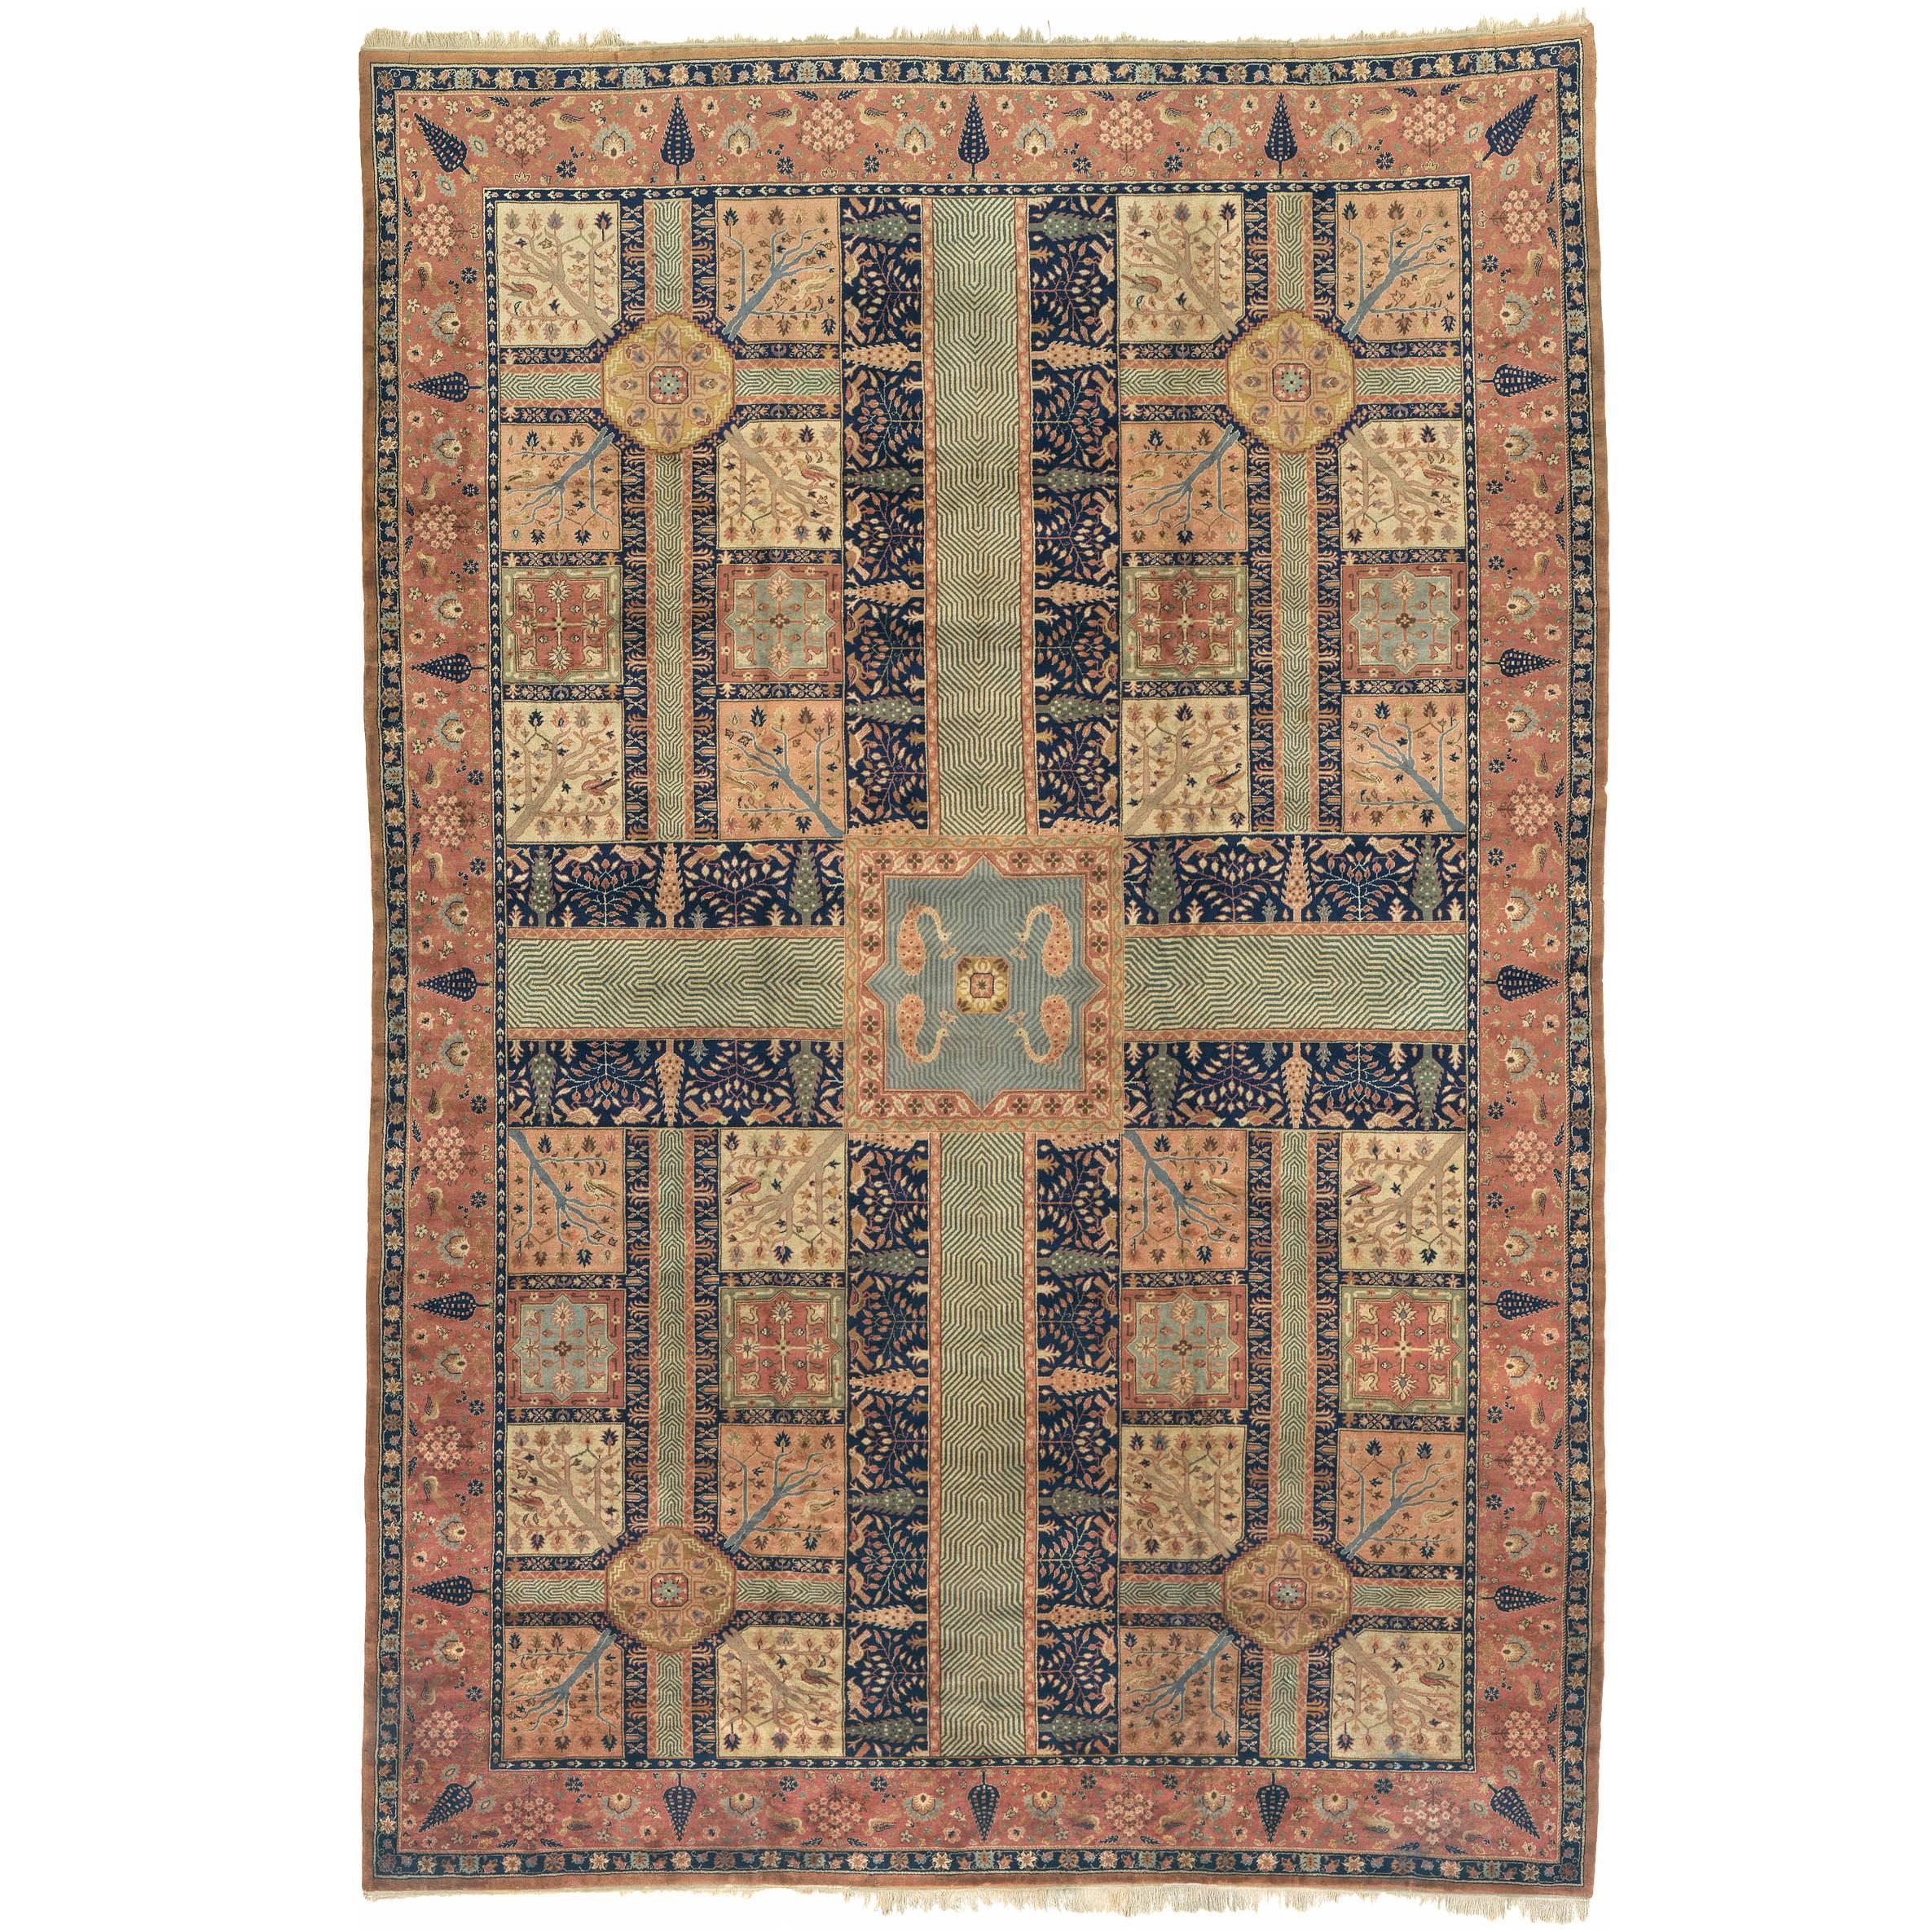 Early 20th Century Indo-Persian Carpet